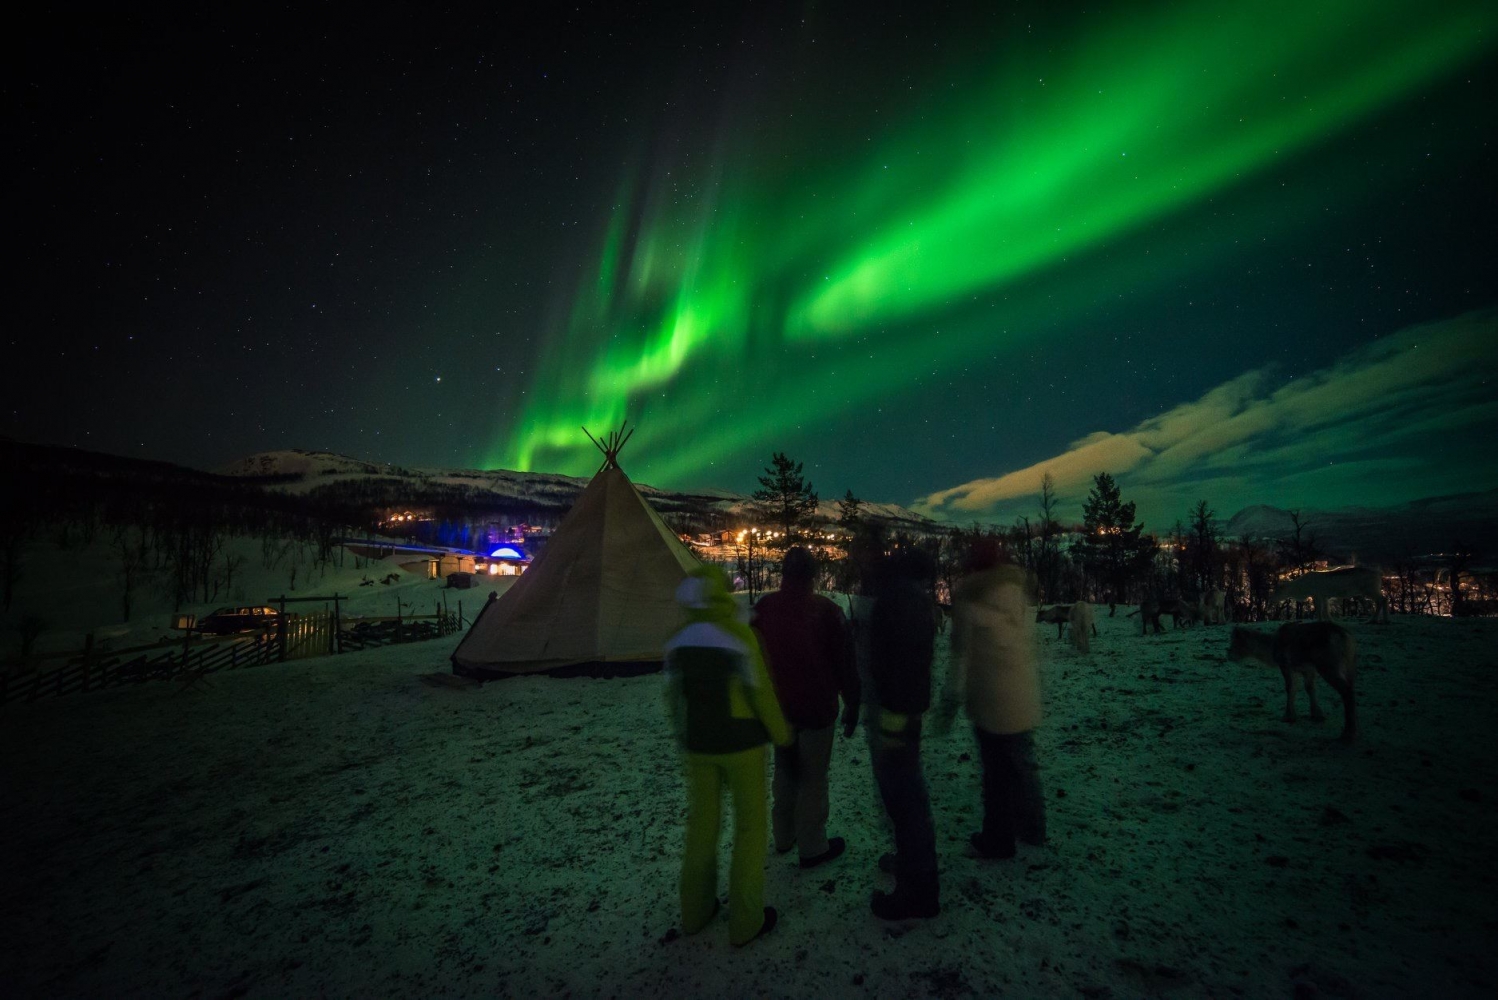 Persons watching the Northern lights, a sami lavvu in the background